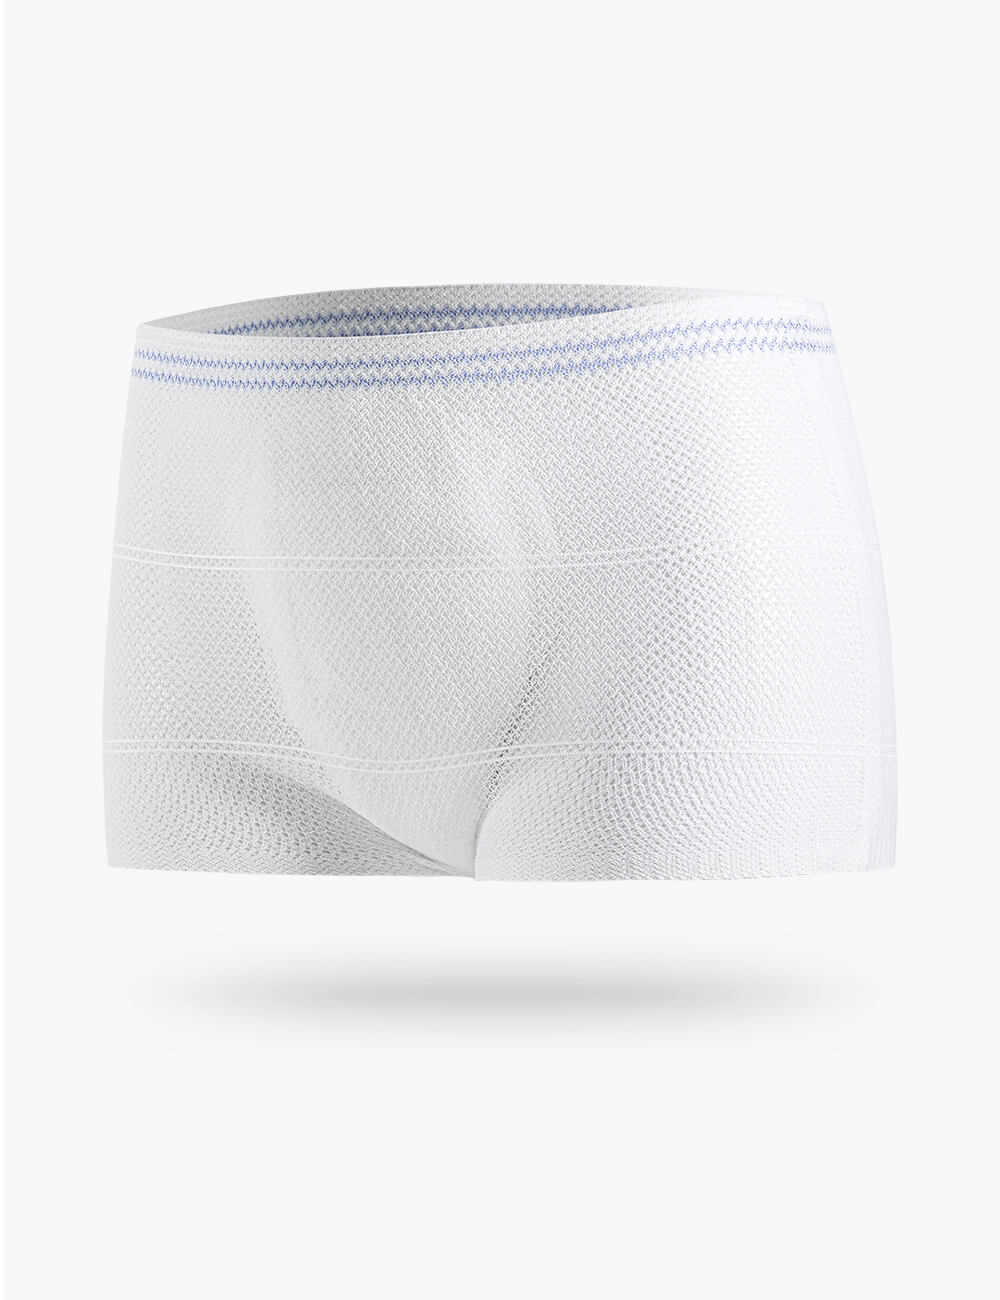 China hospital mesh disposable underwear supplier, disposable mesh